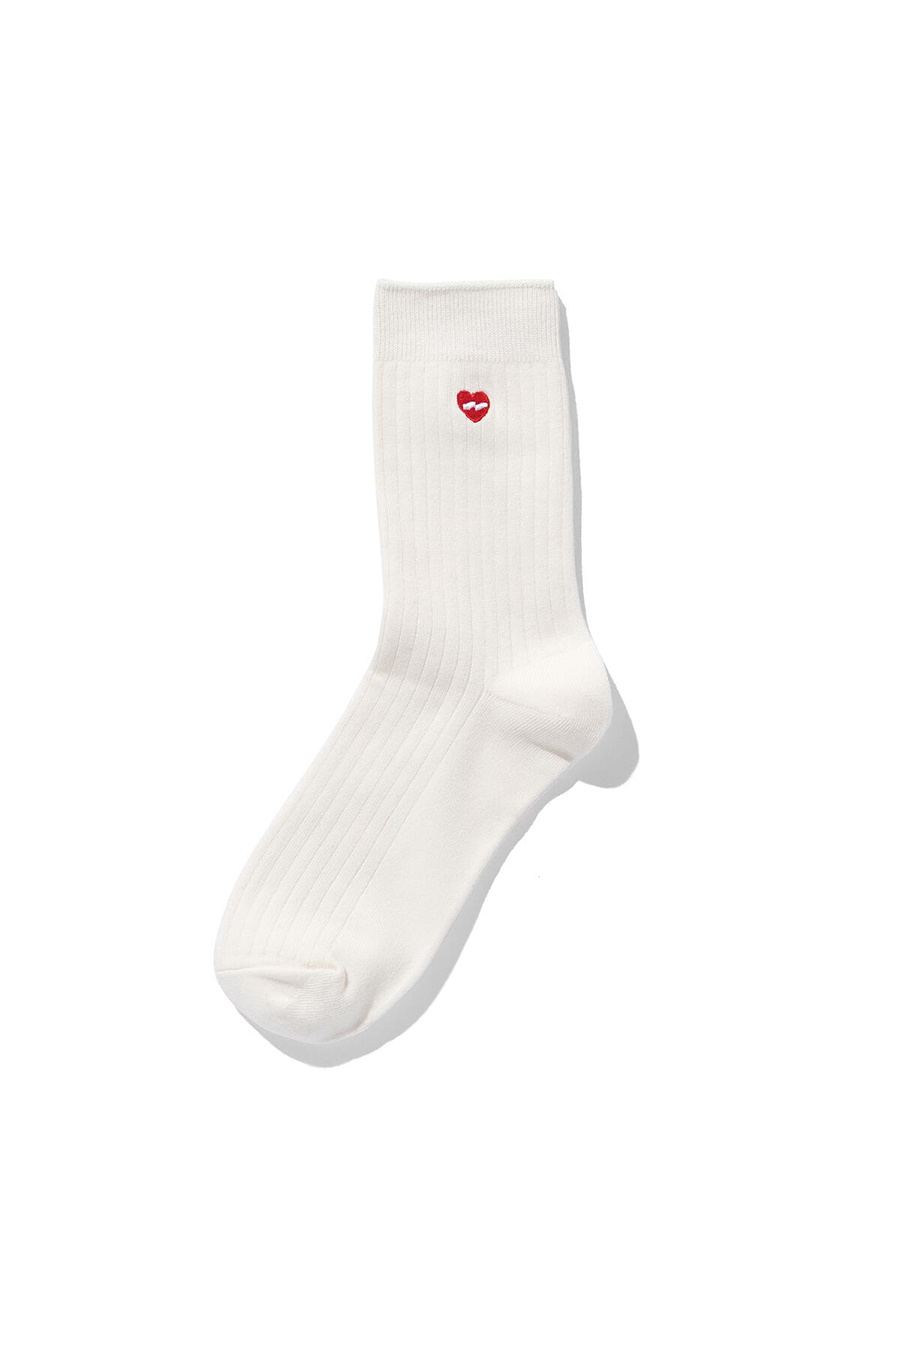 Primary Socks | Off White - Main Image Number 1 of 1